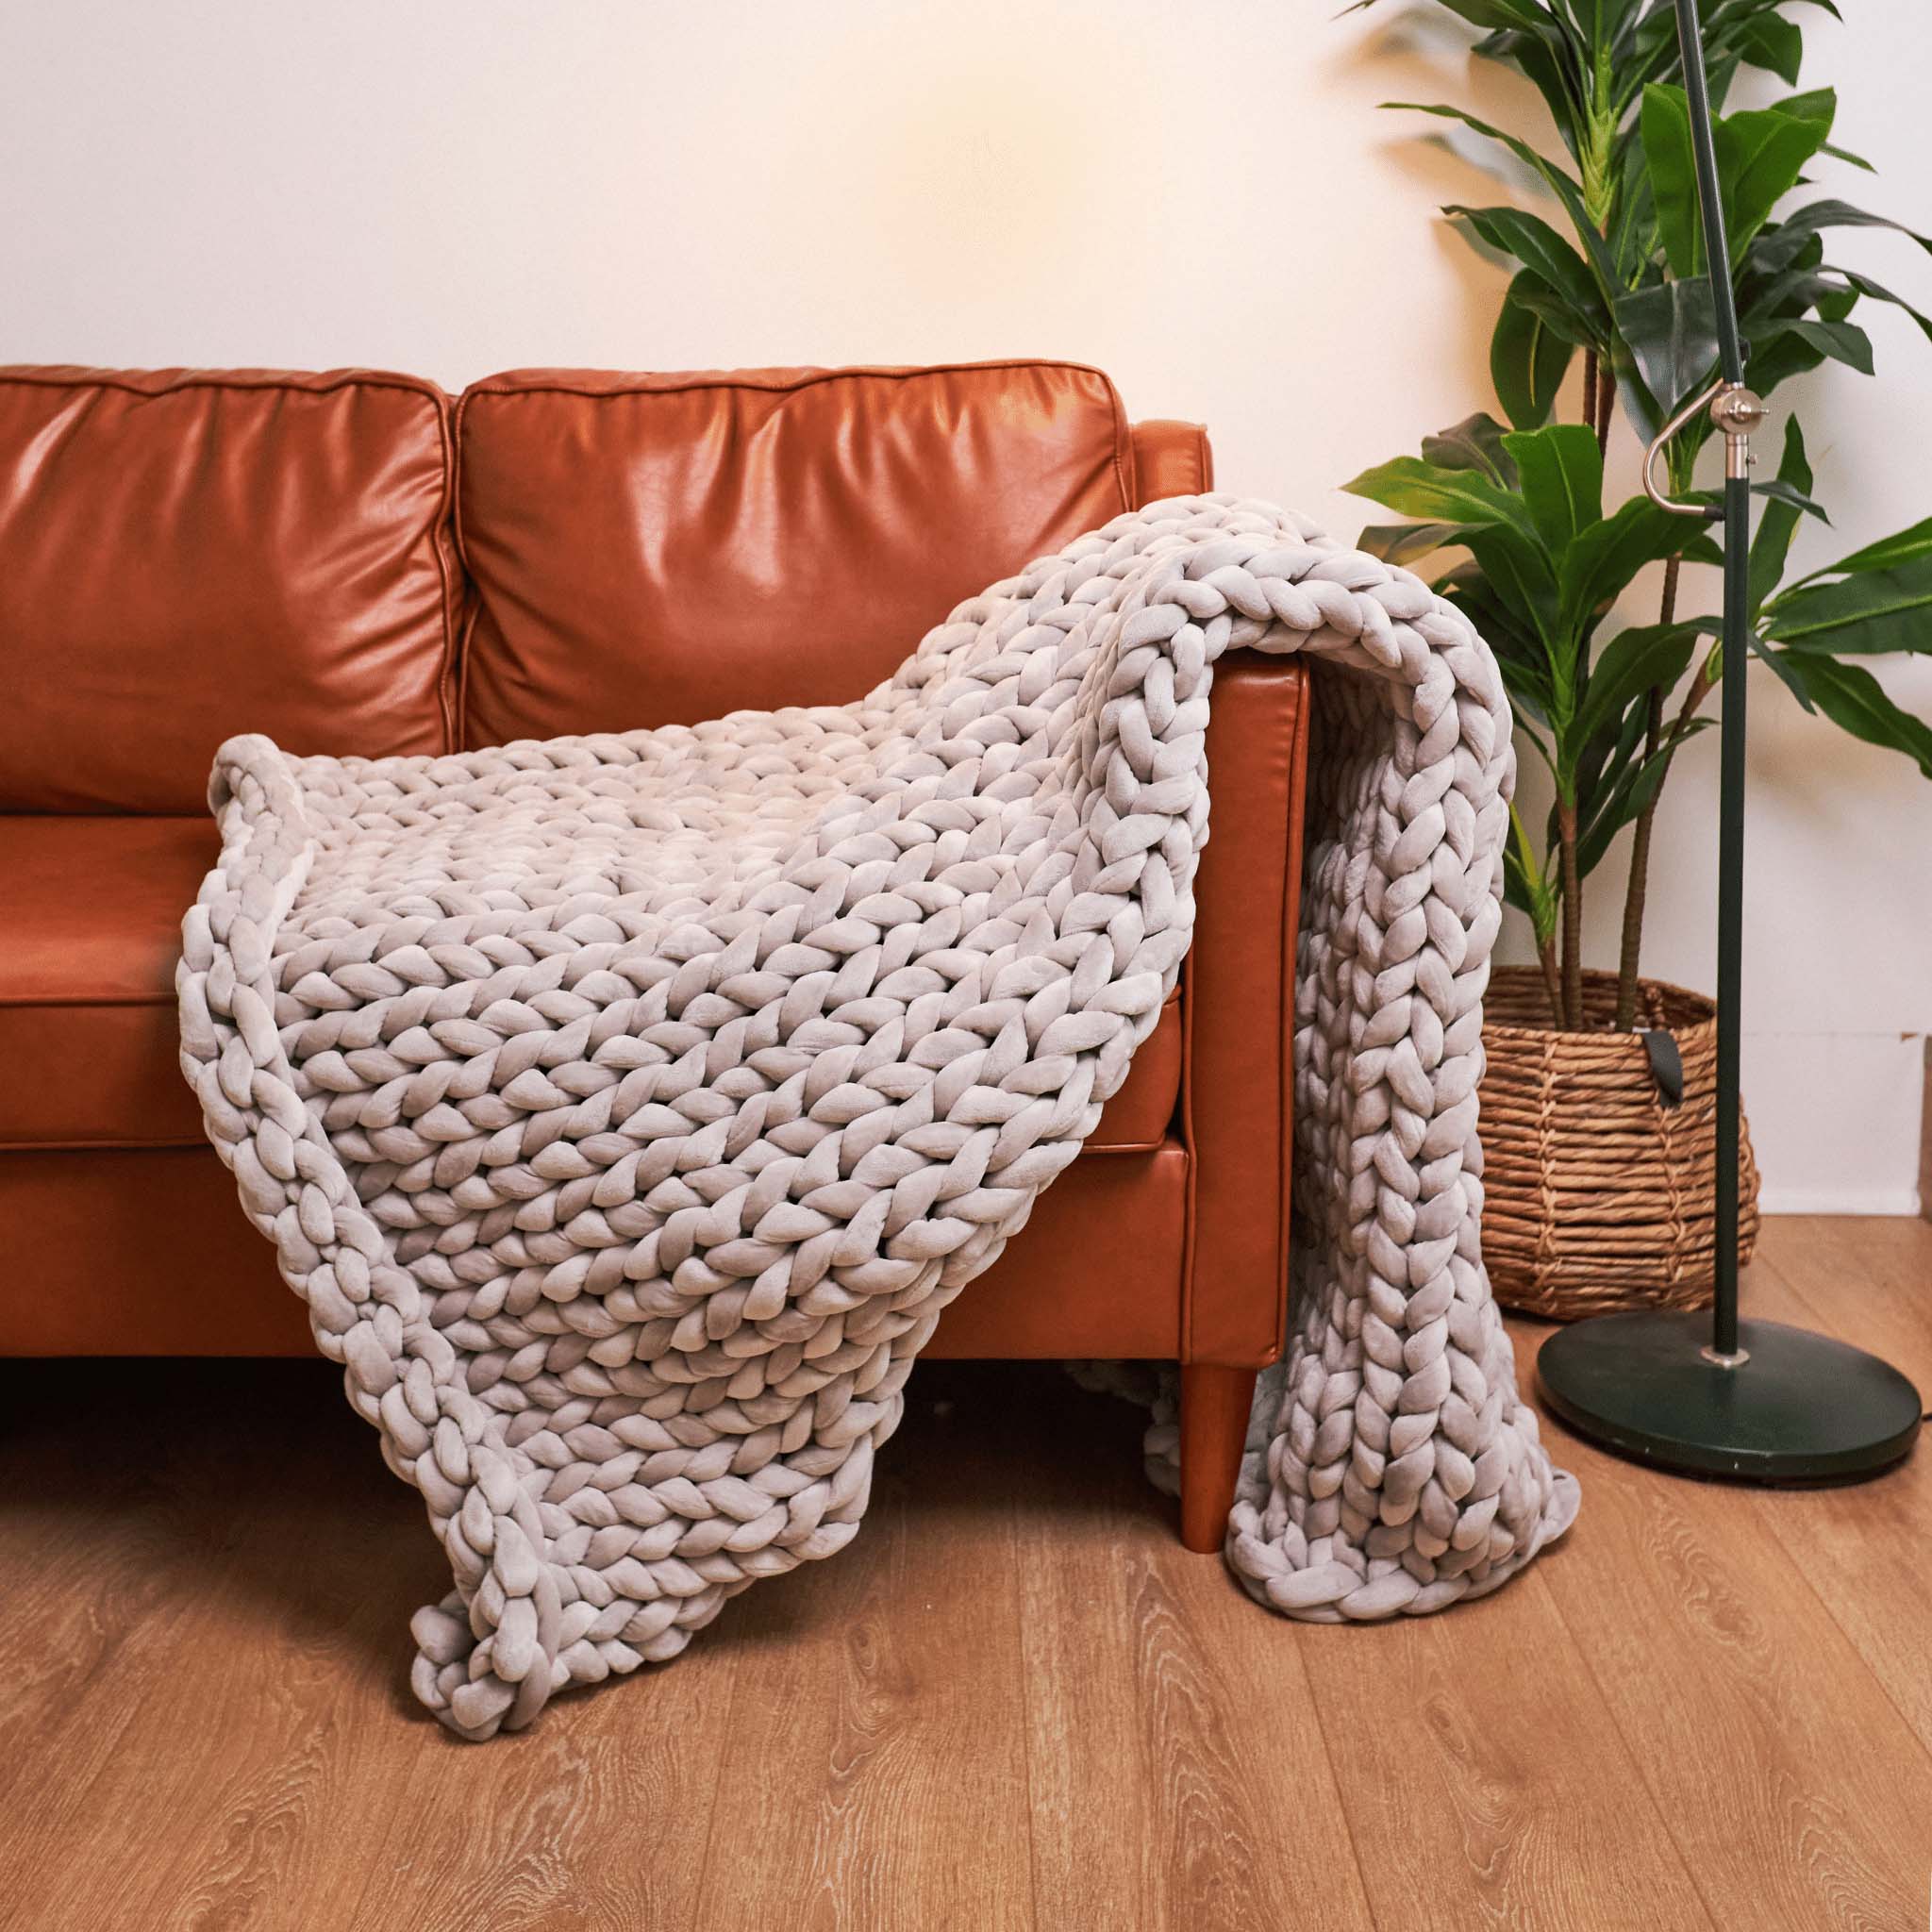 HXSM Chunky Knitted Blanket Giant Yarn Cable Knit Blanket Soft Knitted  Weighted Blanket Cozy Oversized Blanket Couch, Bed, Pet Mat, Baby Blanket,  Gift